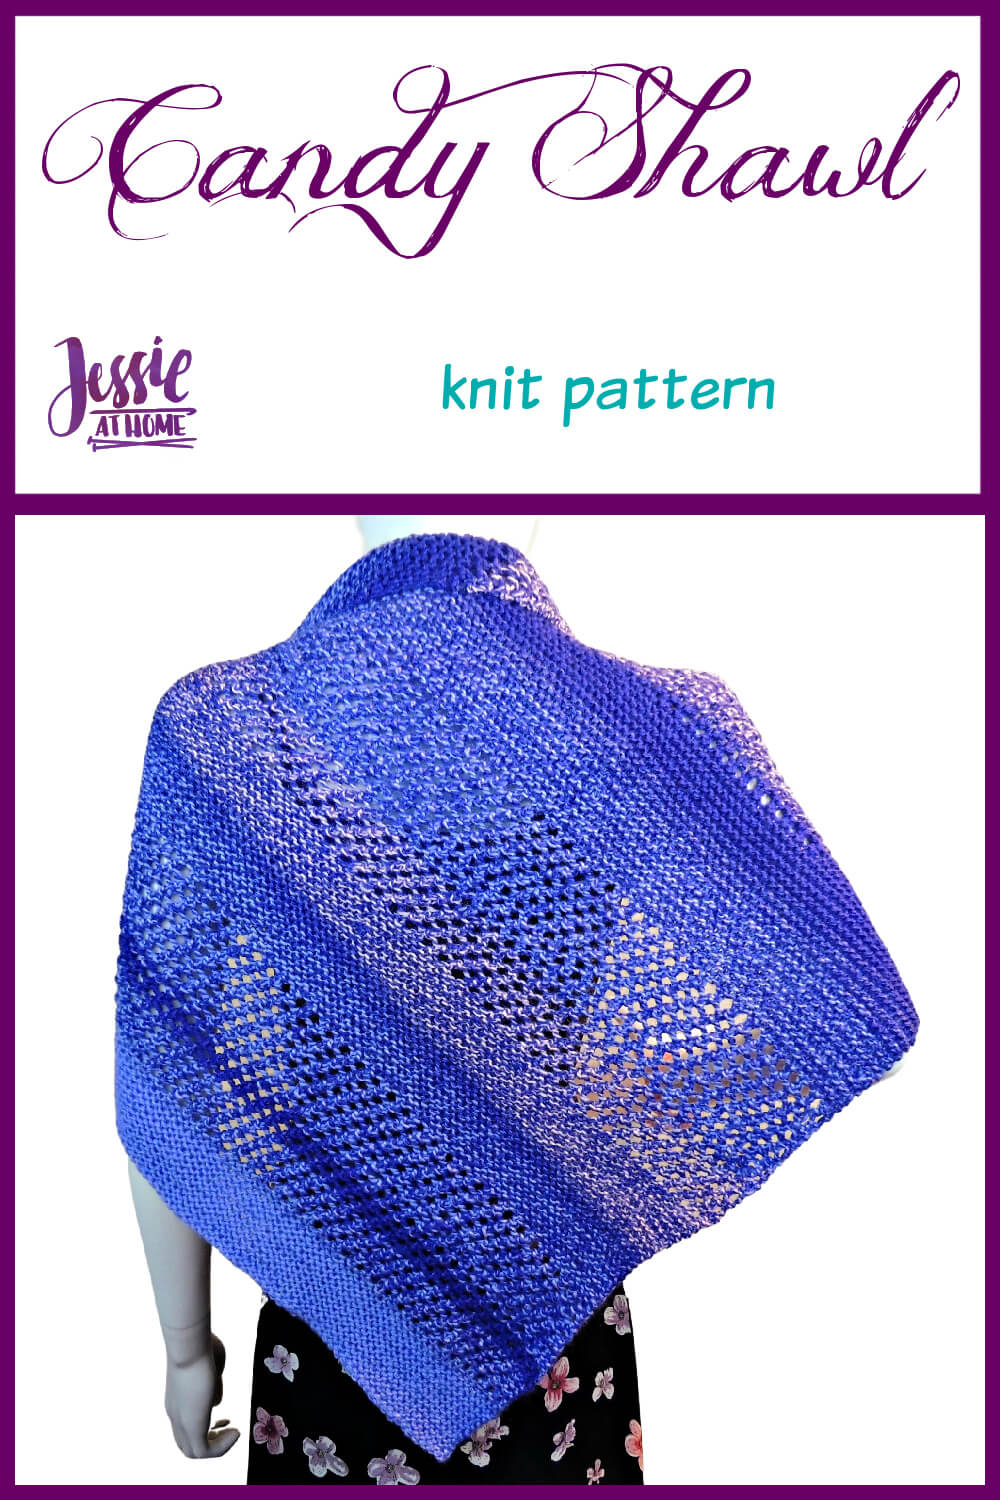 Candy Shawl knit pattern by Jessie At Home - Pin 1